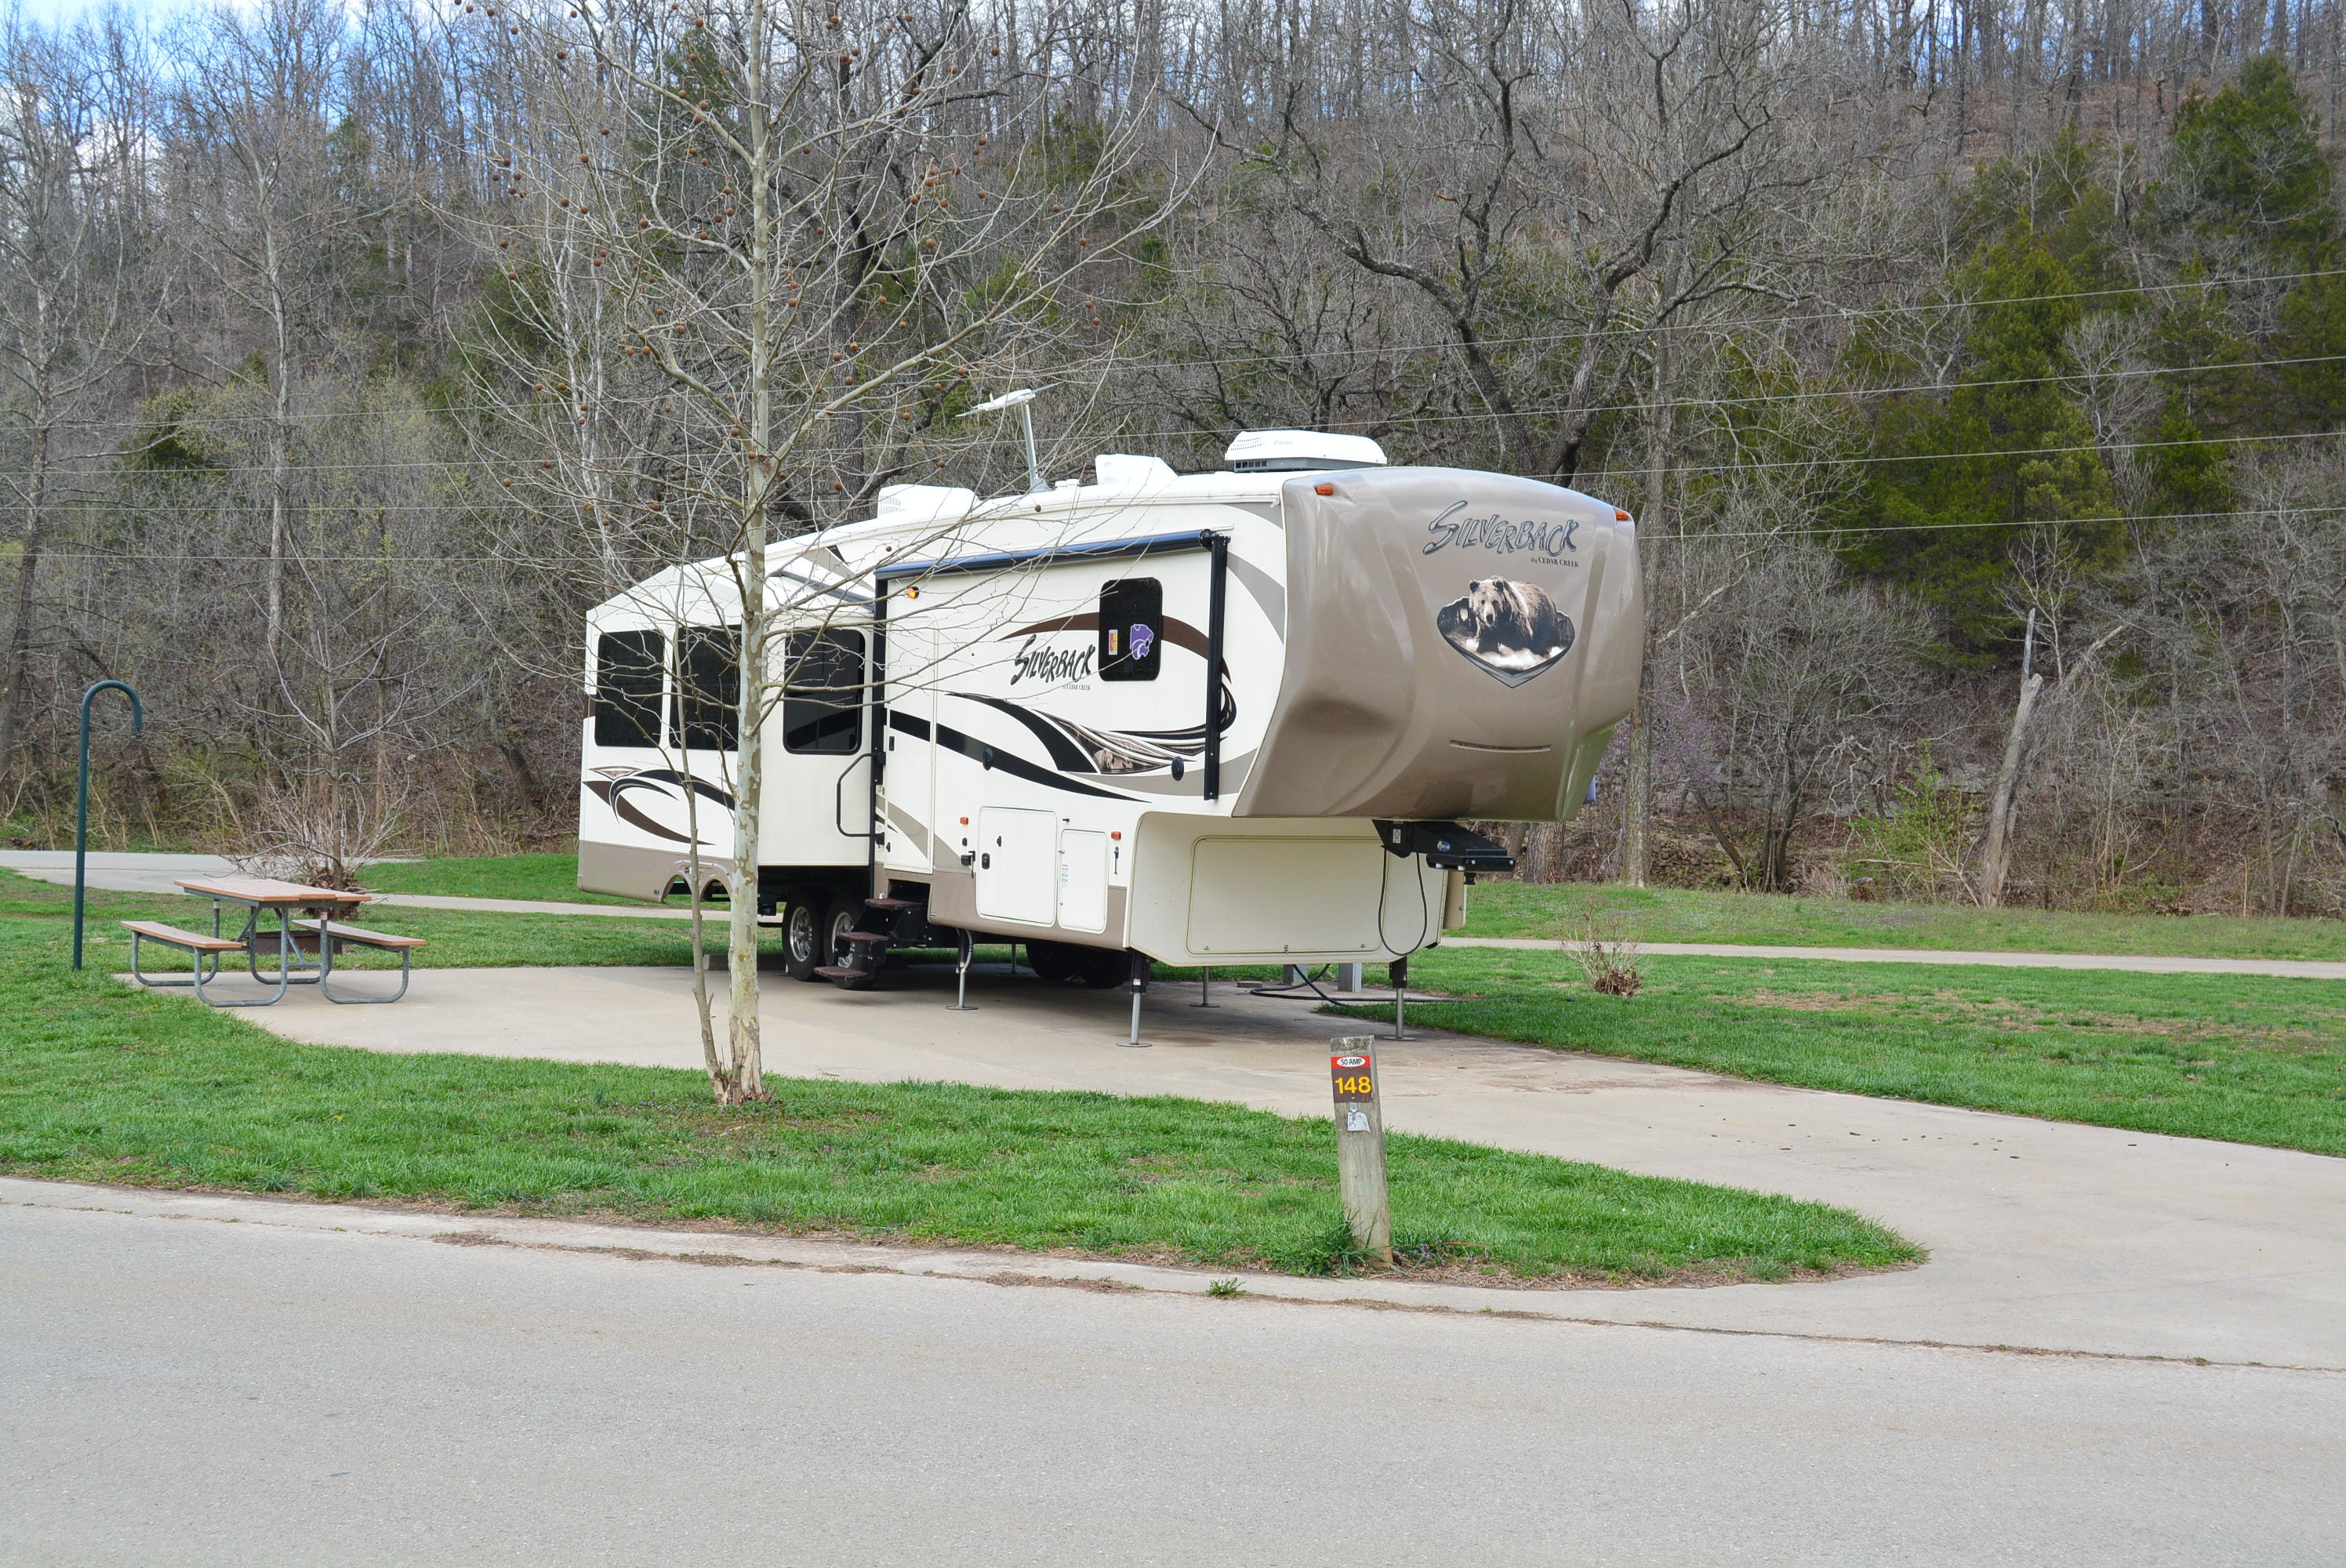 Camper submitted image from Bennett Spring State Park Campground - 5